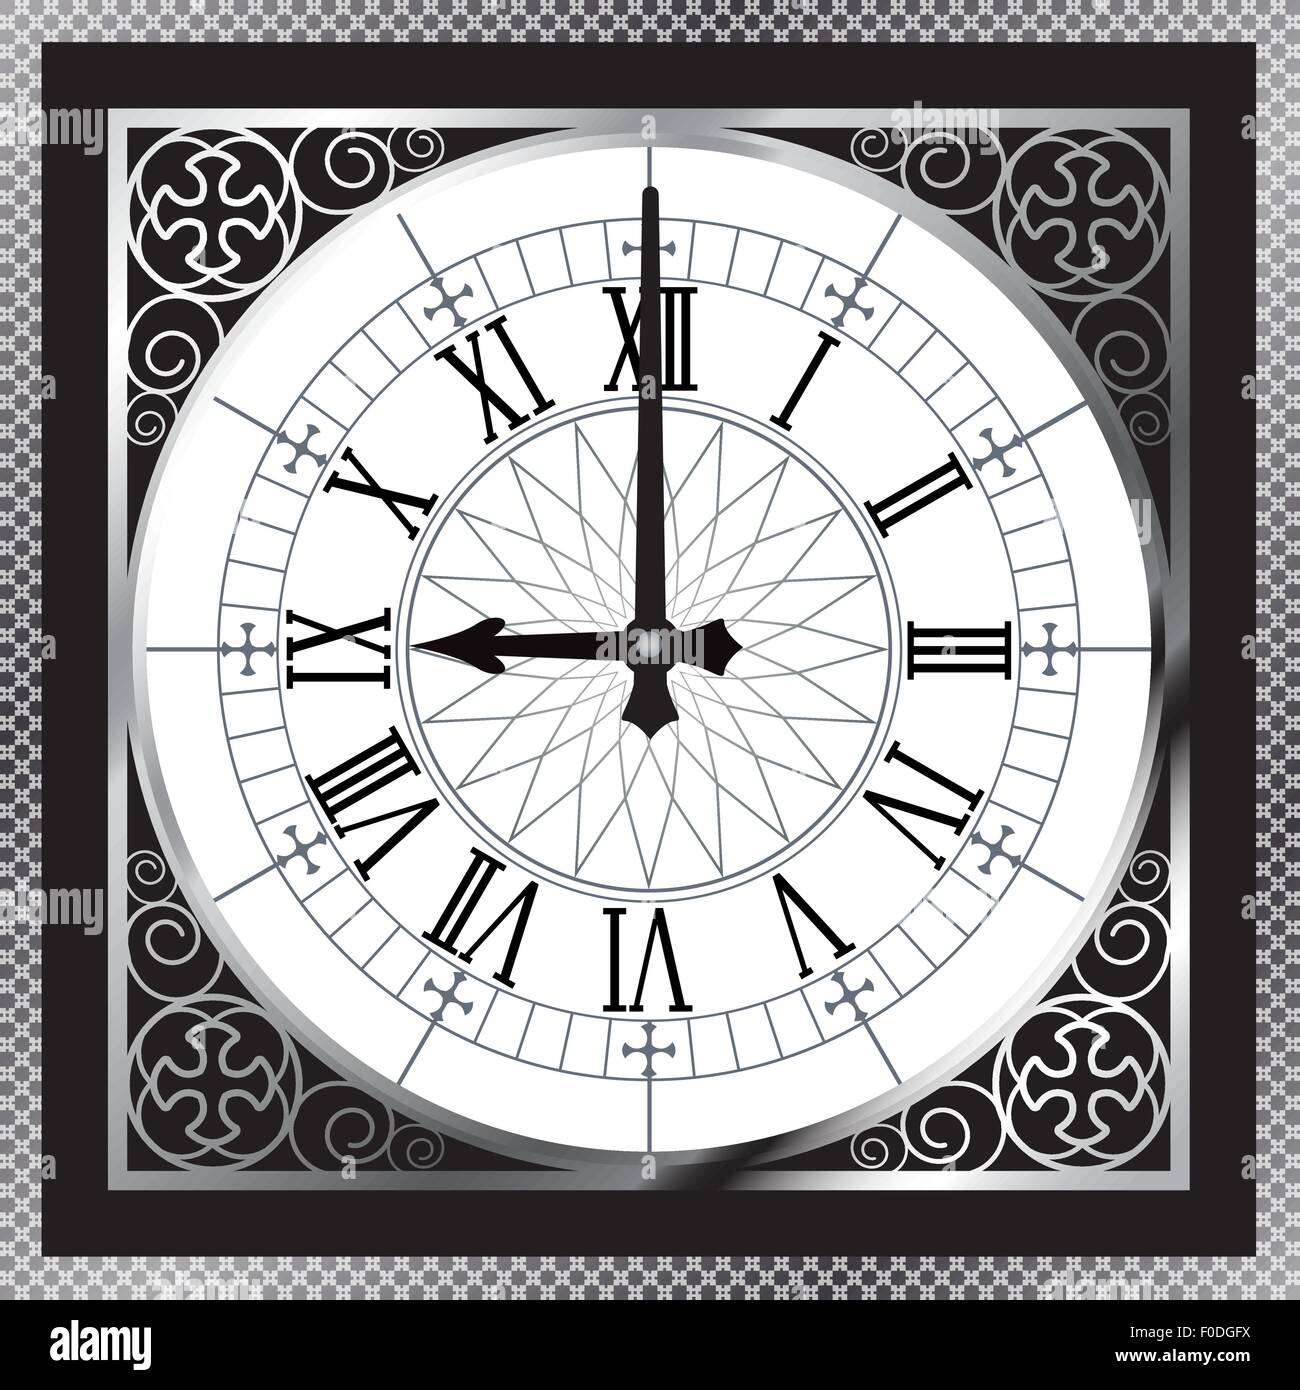 Luxury white gold metal clock with Roman numerals and pattern boarder Stock Vector